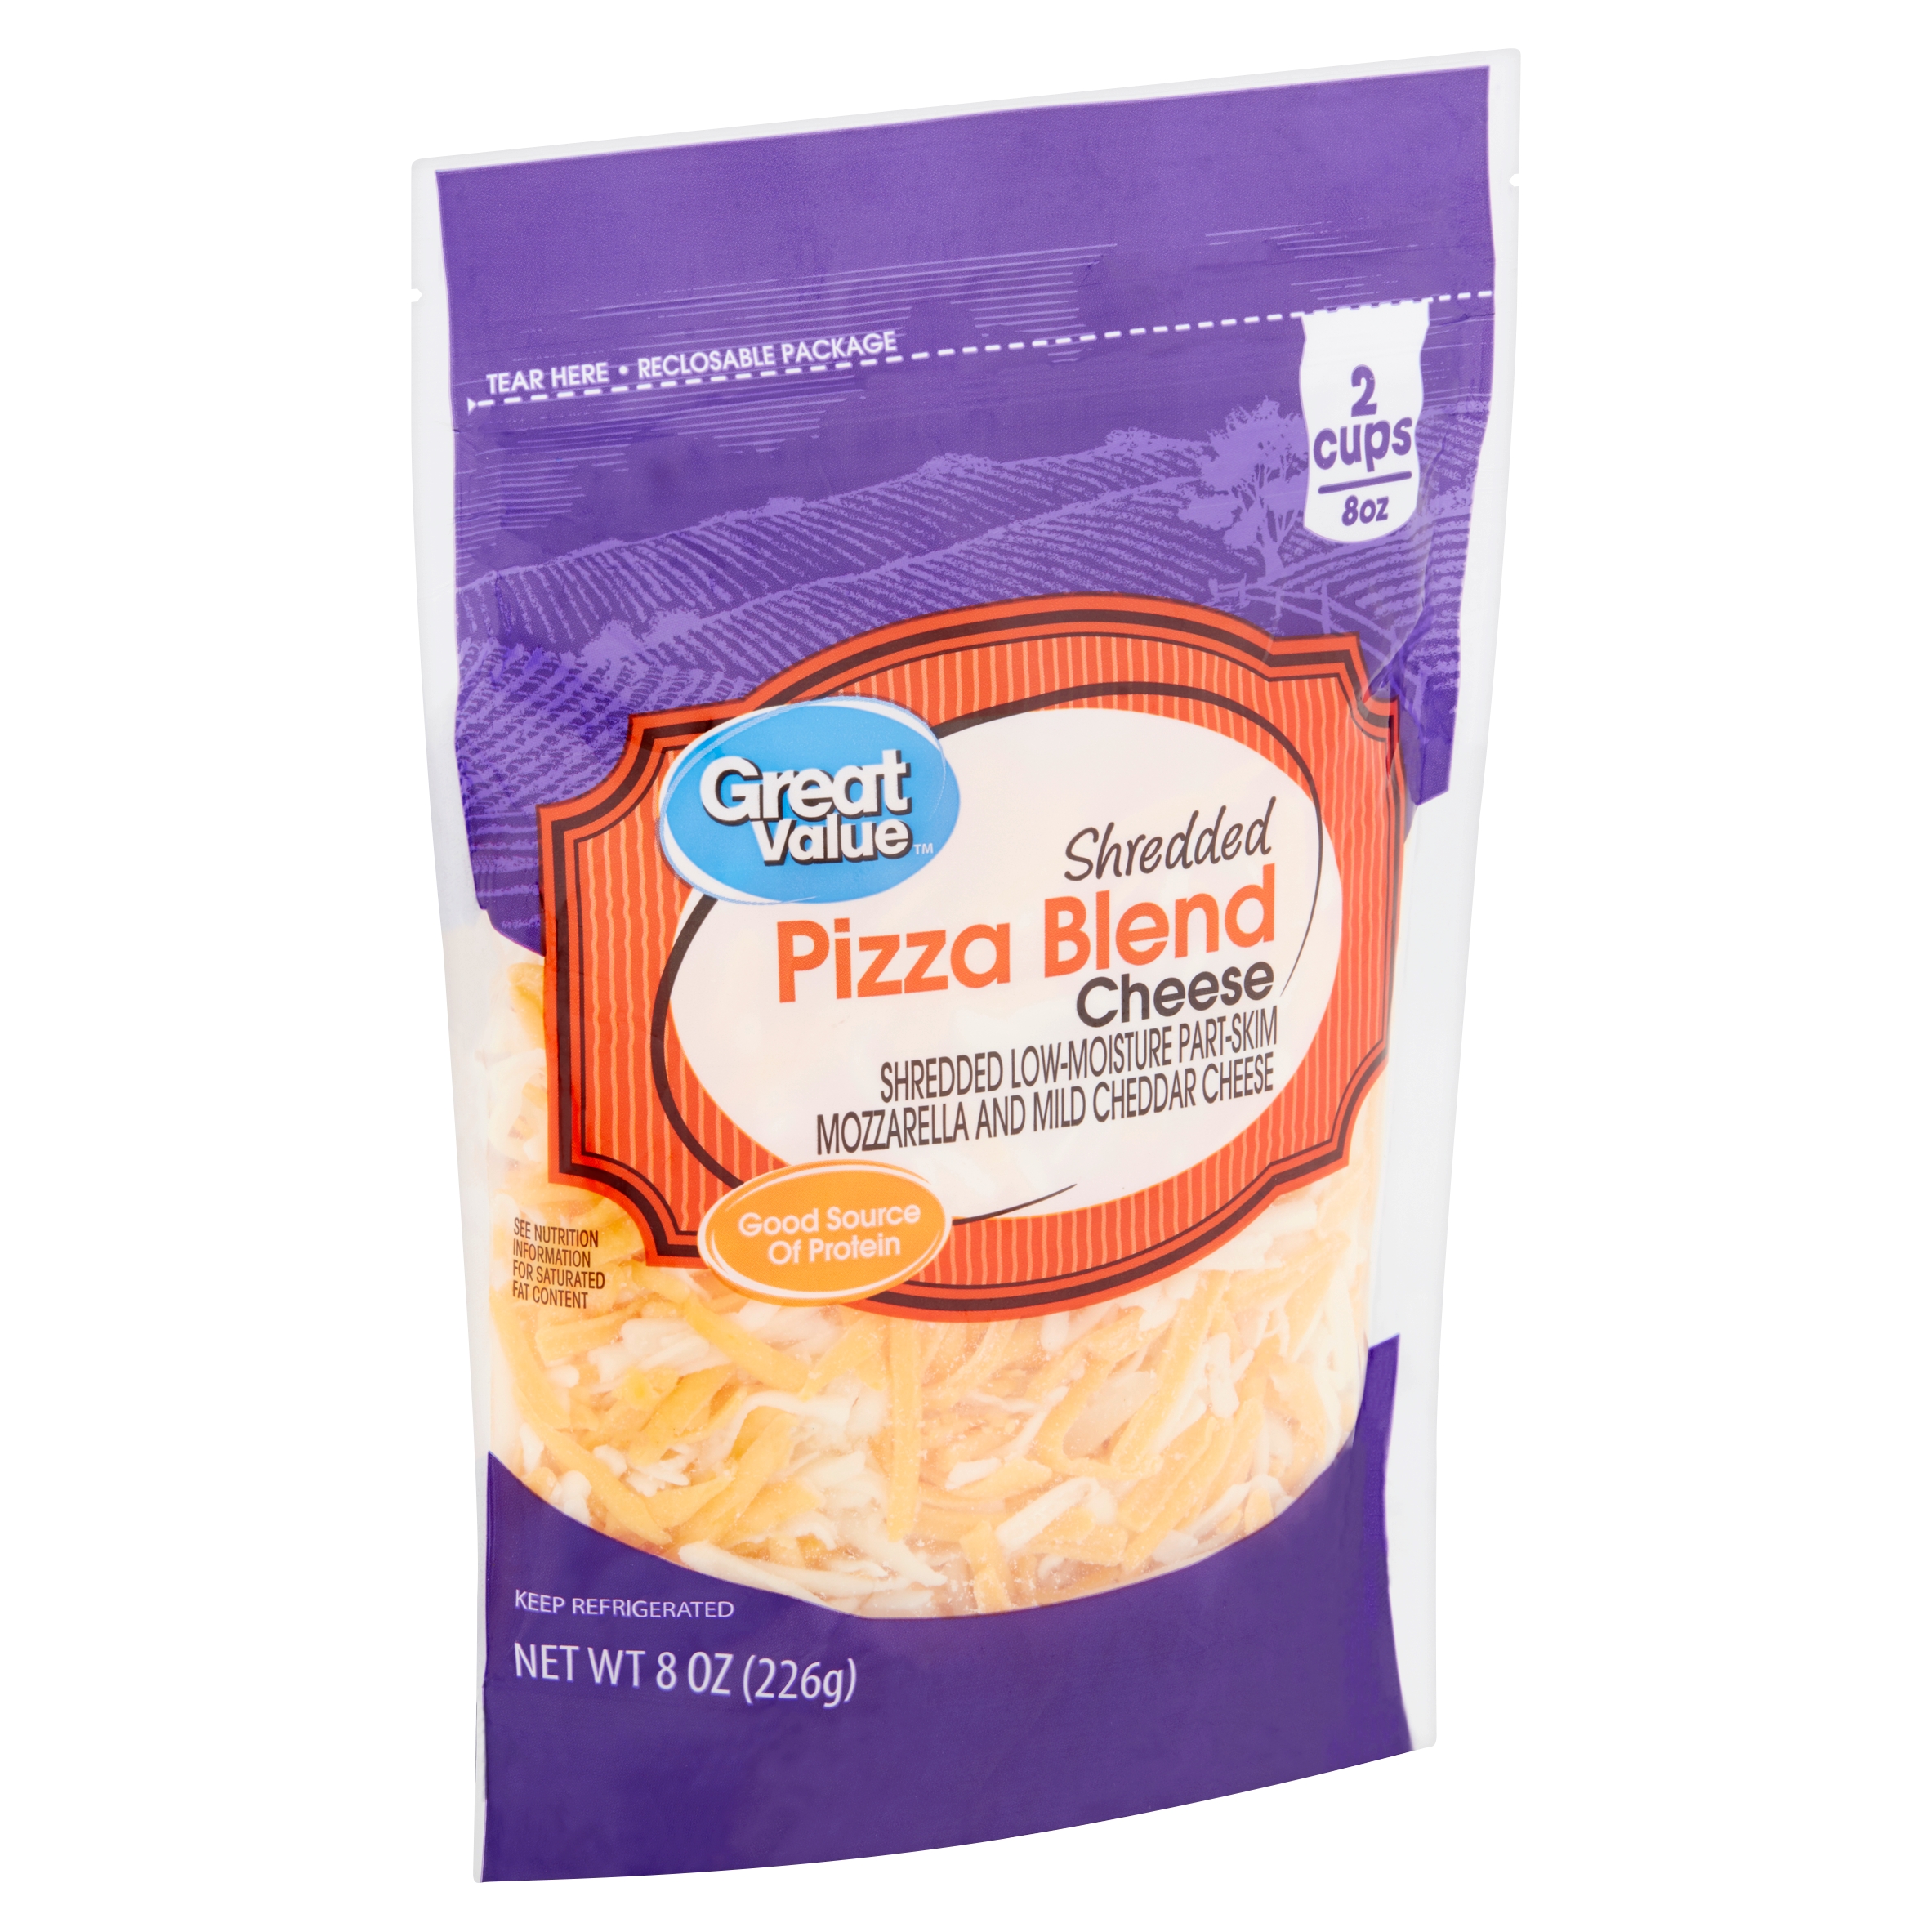 Great Value Shredded Pizza Blend Cheese, 8 Oz Image